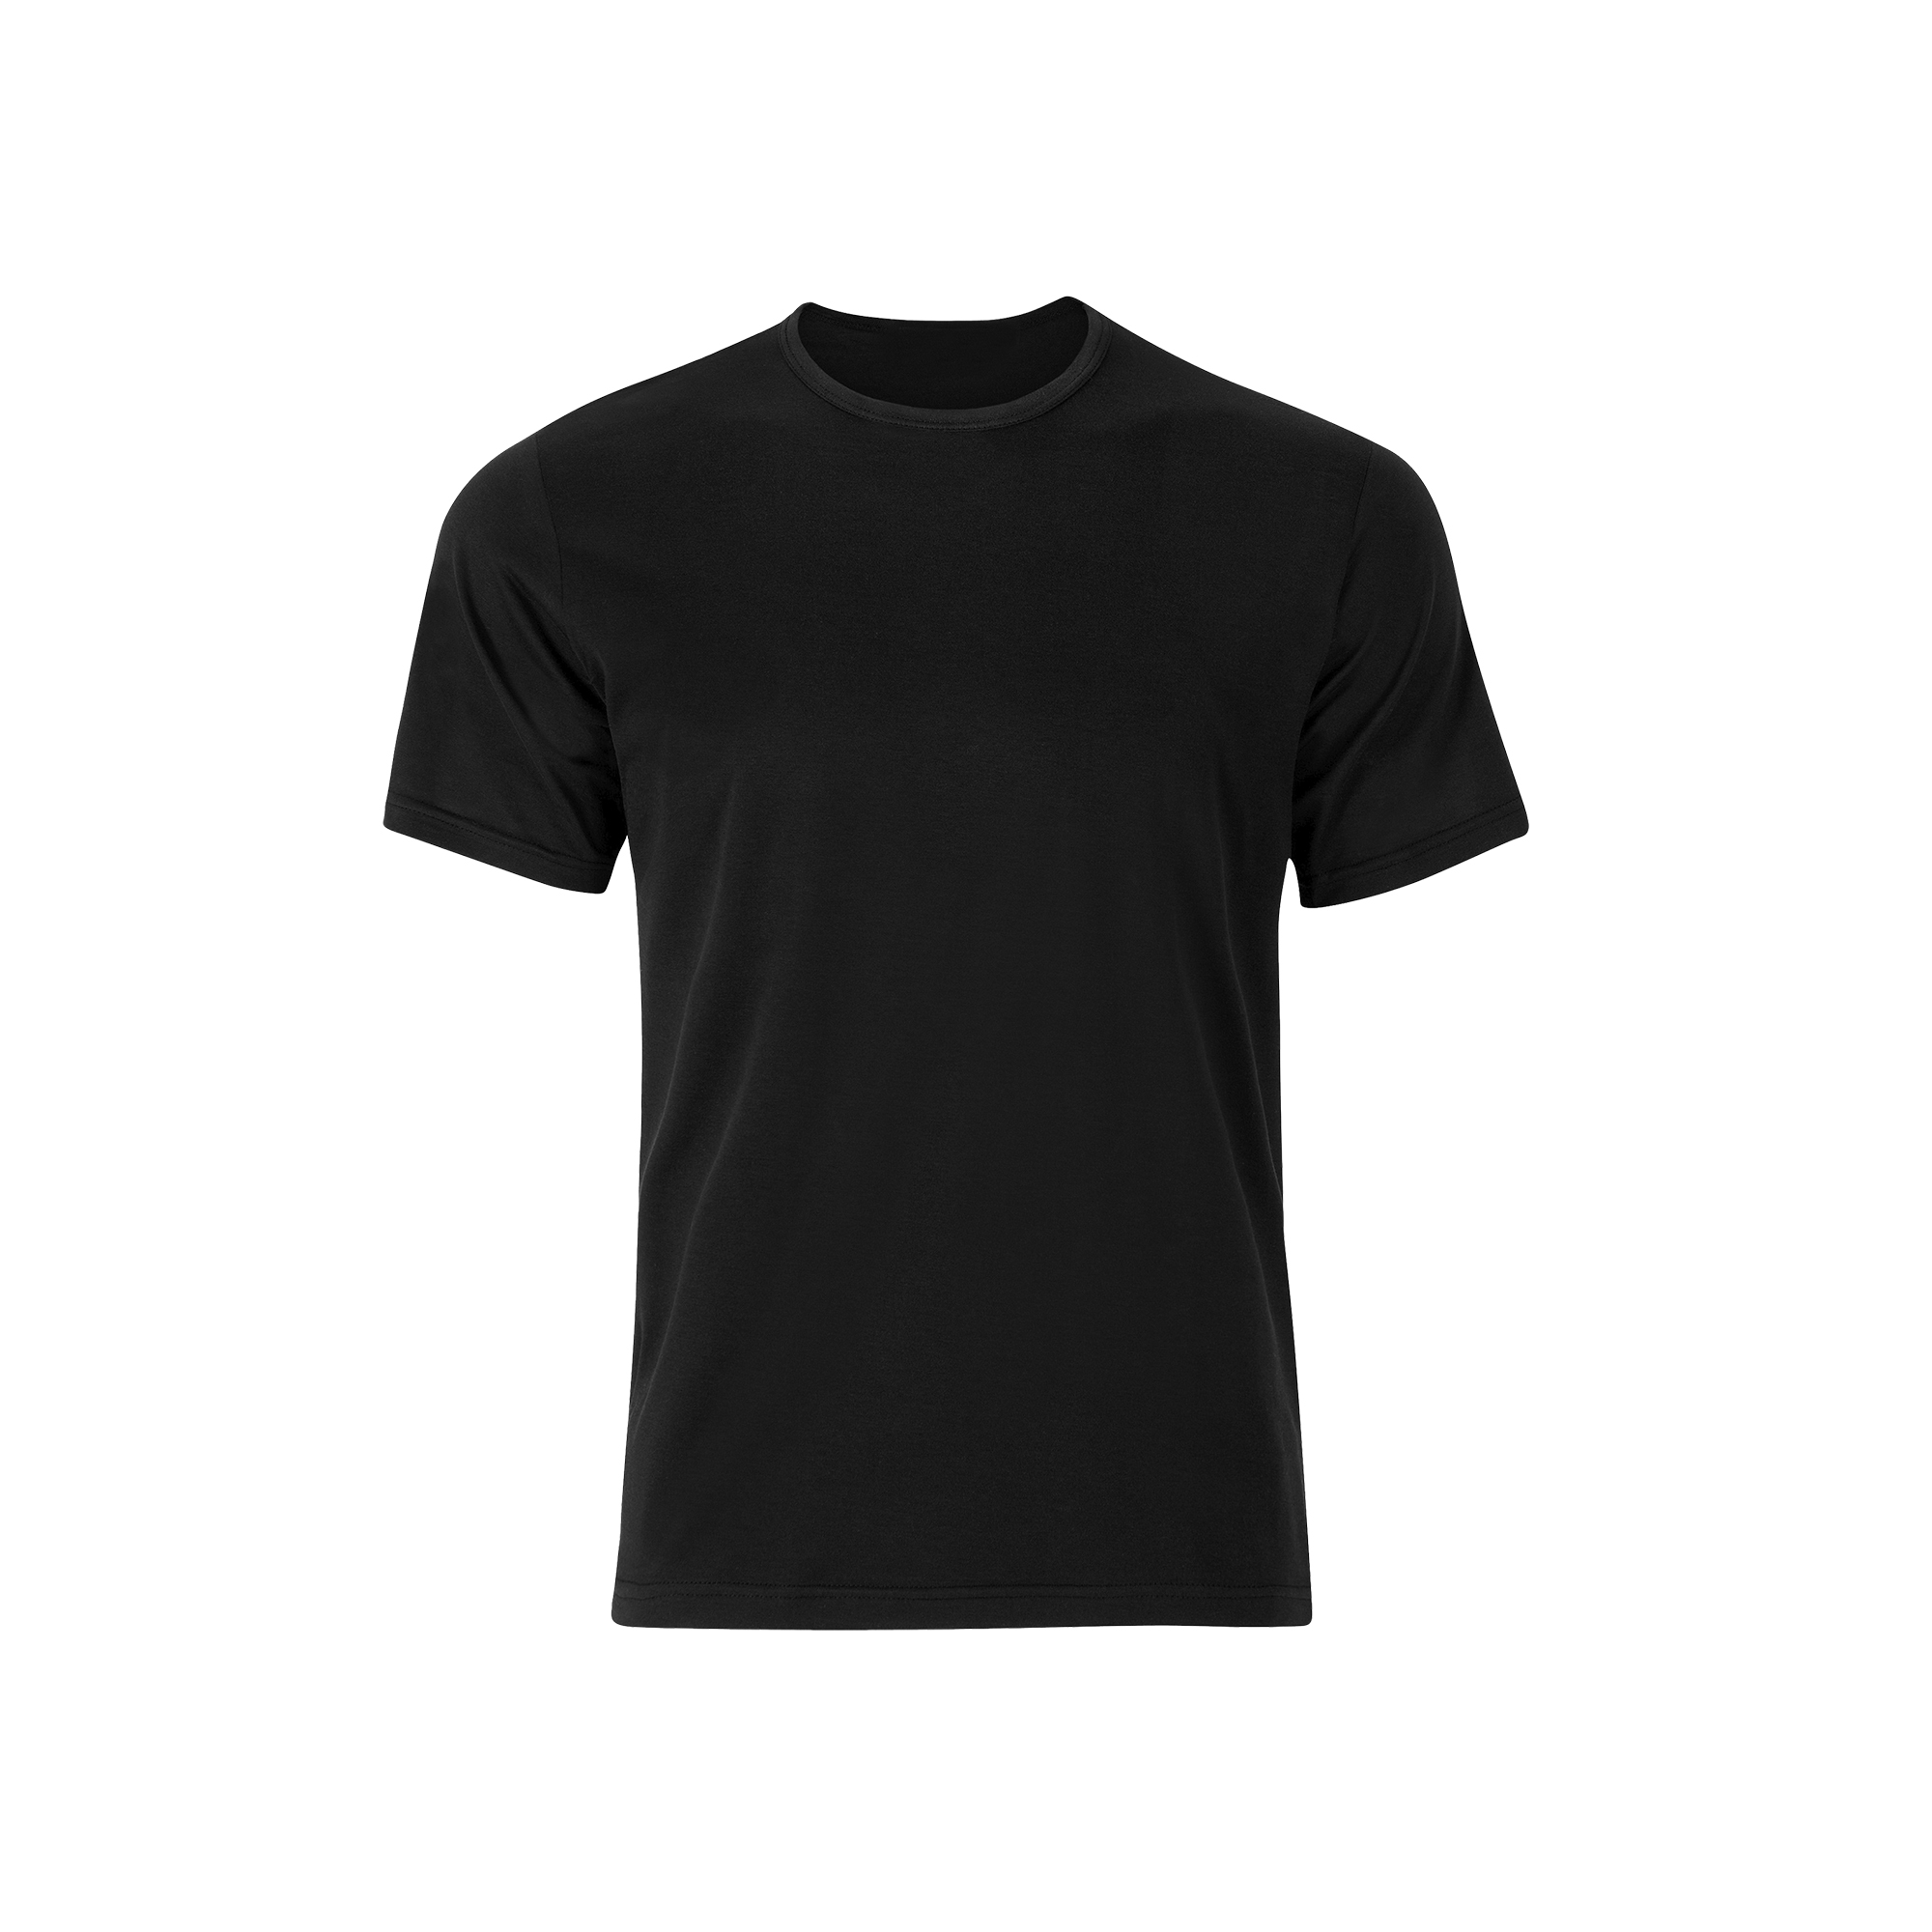 Black T-shirt All sizes available